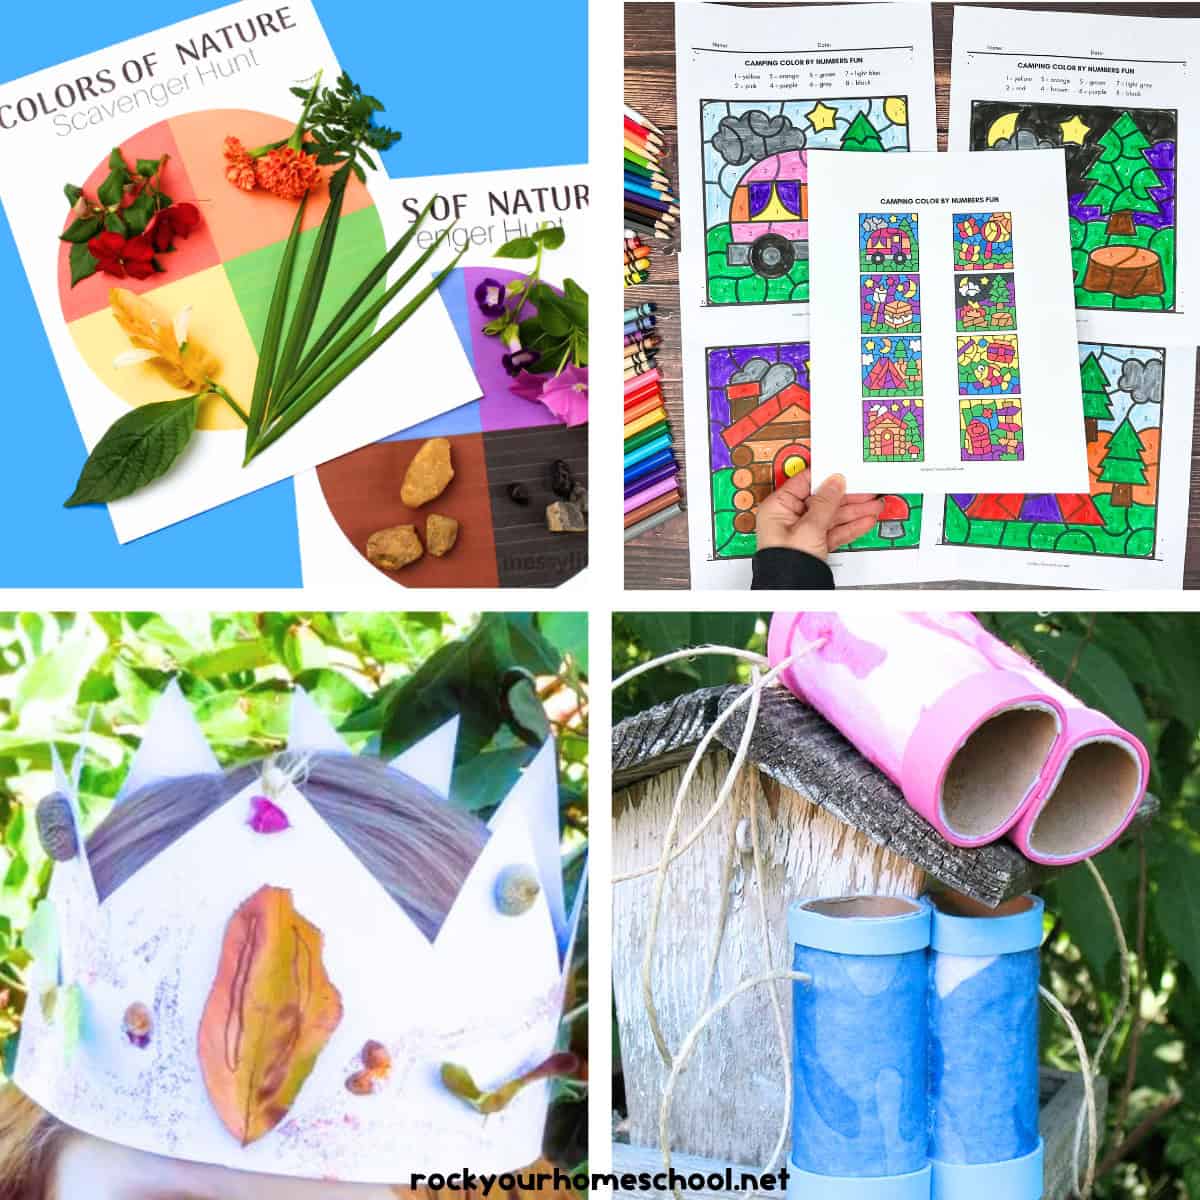 Four examples of fun camping activities for kids with color scavenger hunt, color by number pages, nature crown, and DIY toilet paper roll tube binoculars.